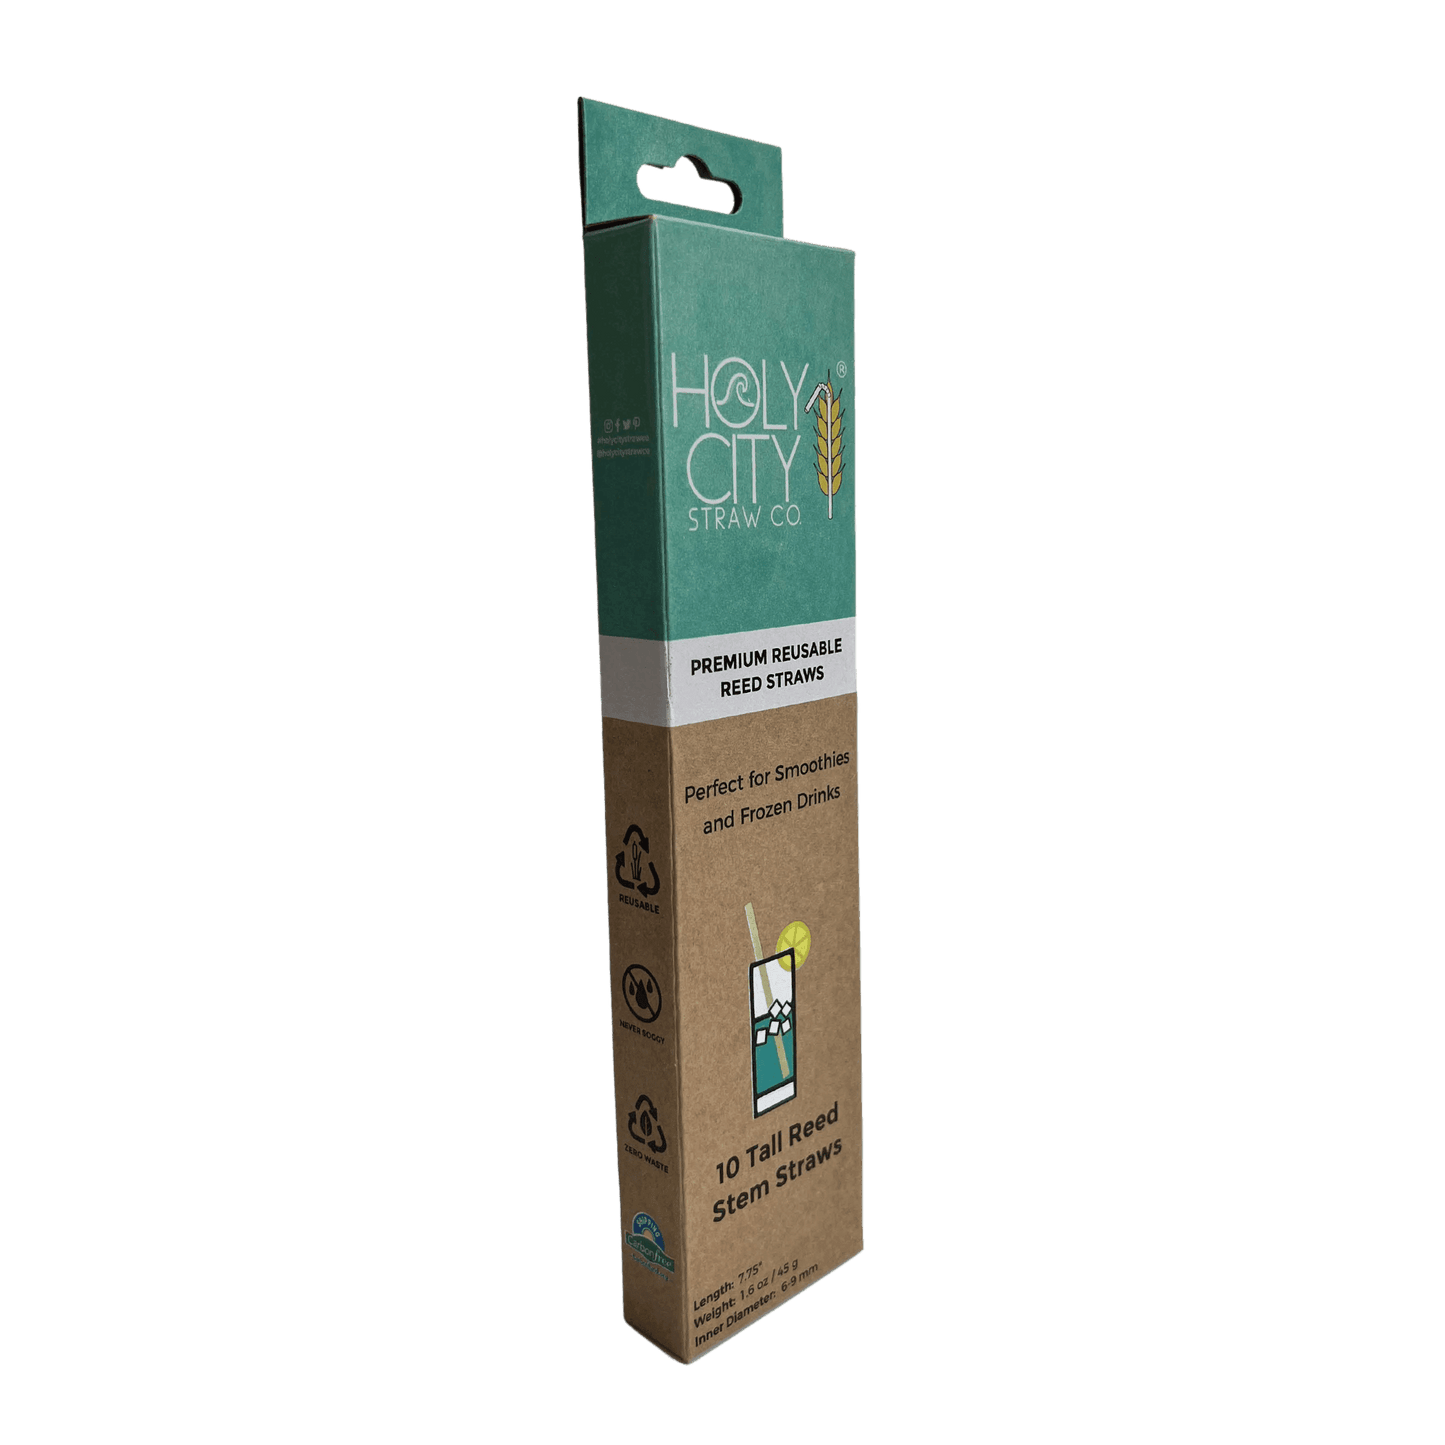 Tall Reed Stem Drinking Straws | Inner pack | 20 x 10ct. Boxes by Holy City Straw Company